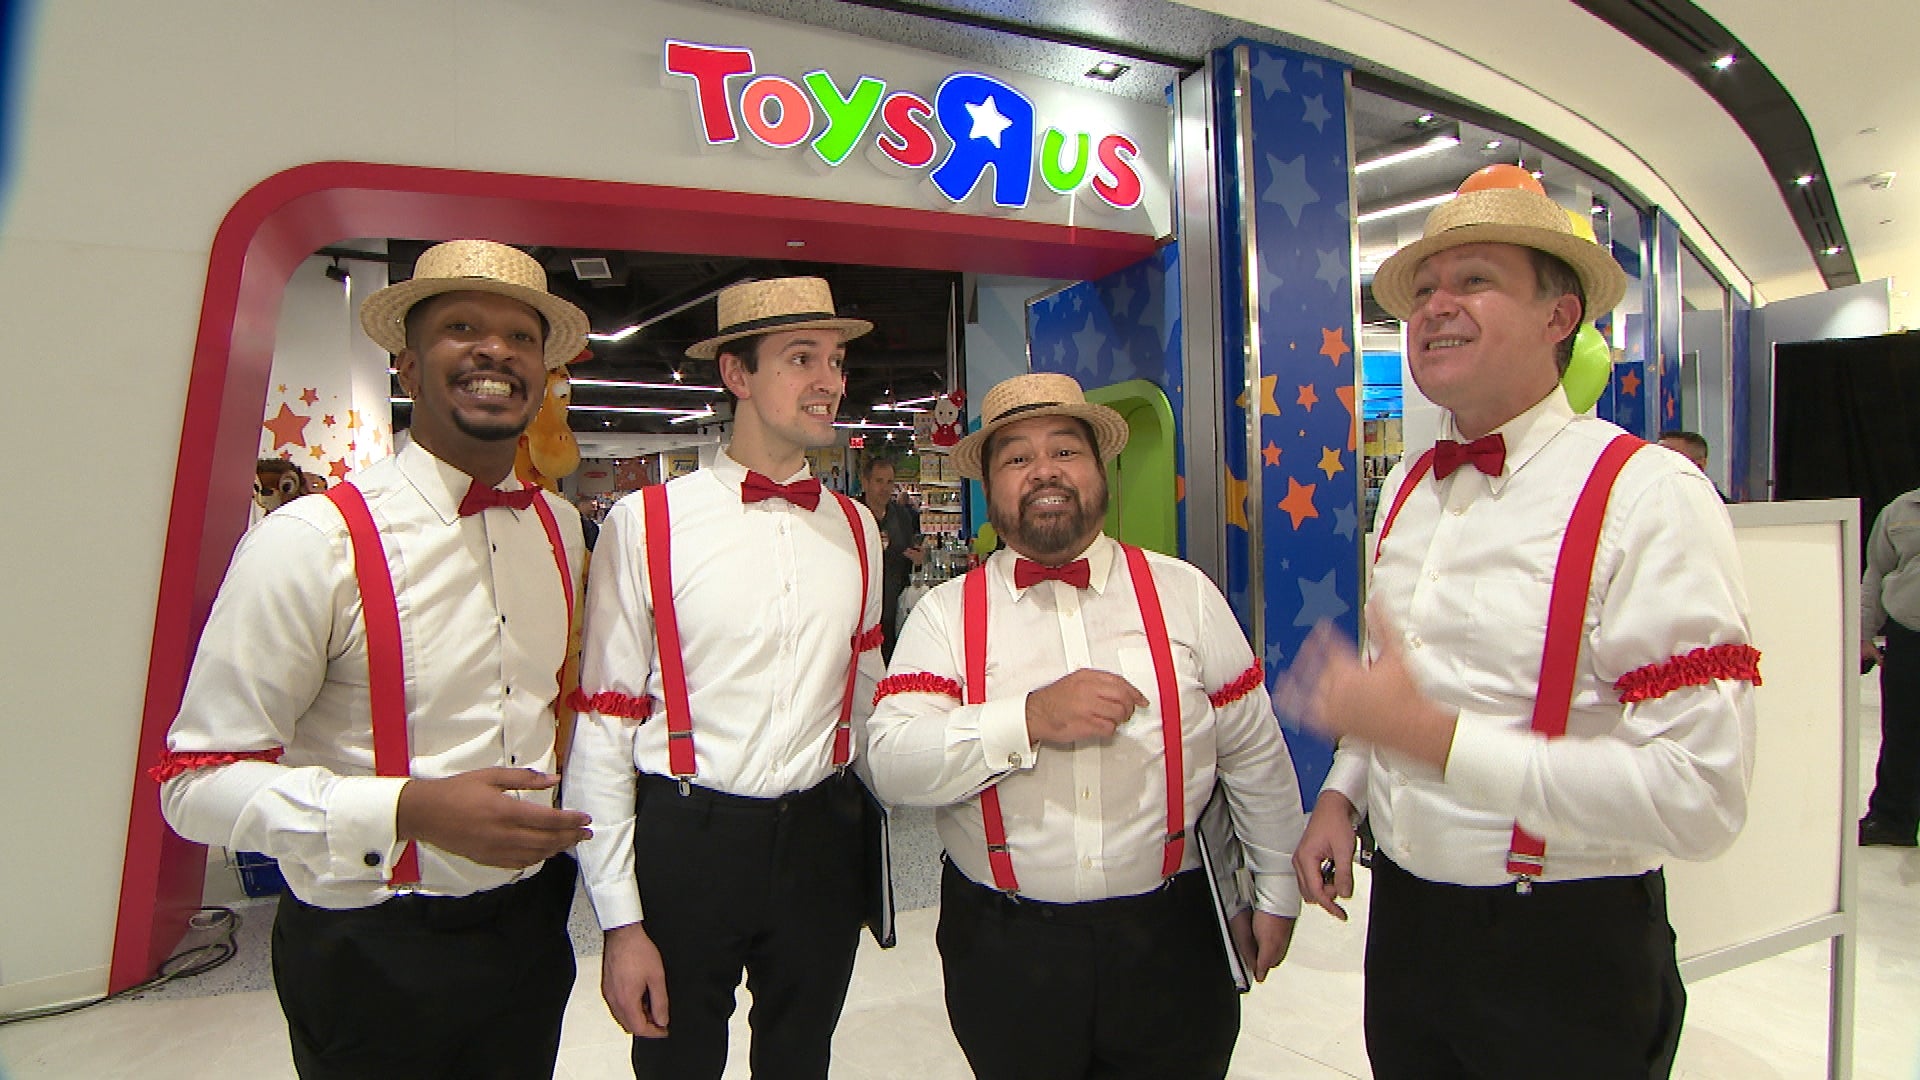 Toys 'R' Us comes to American Dream mall in Jersey